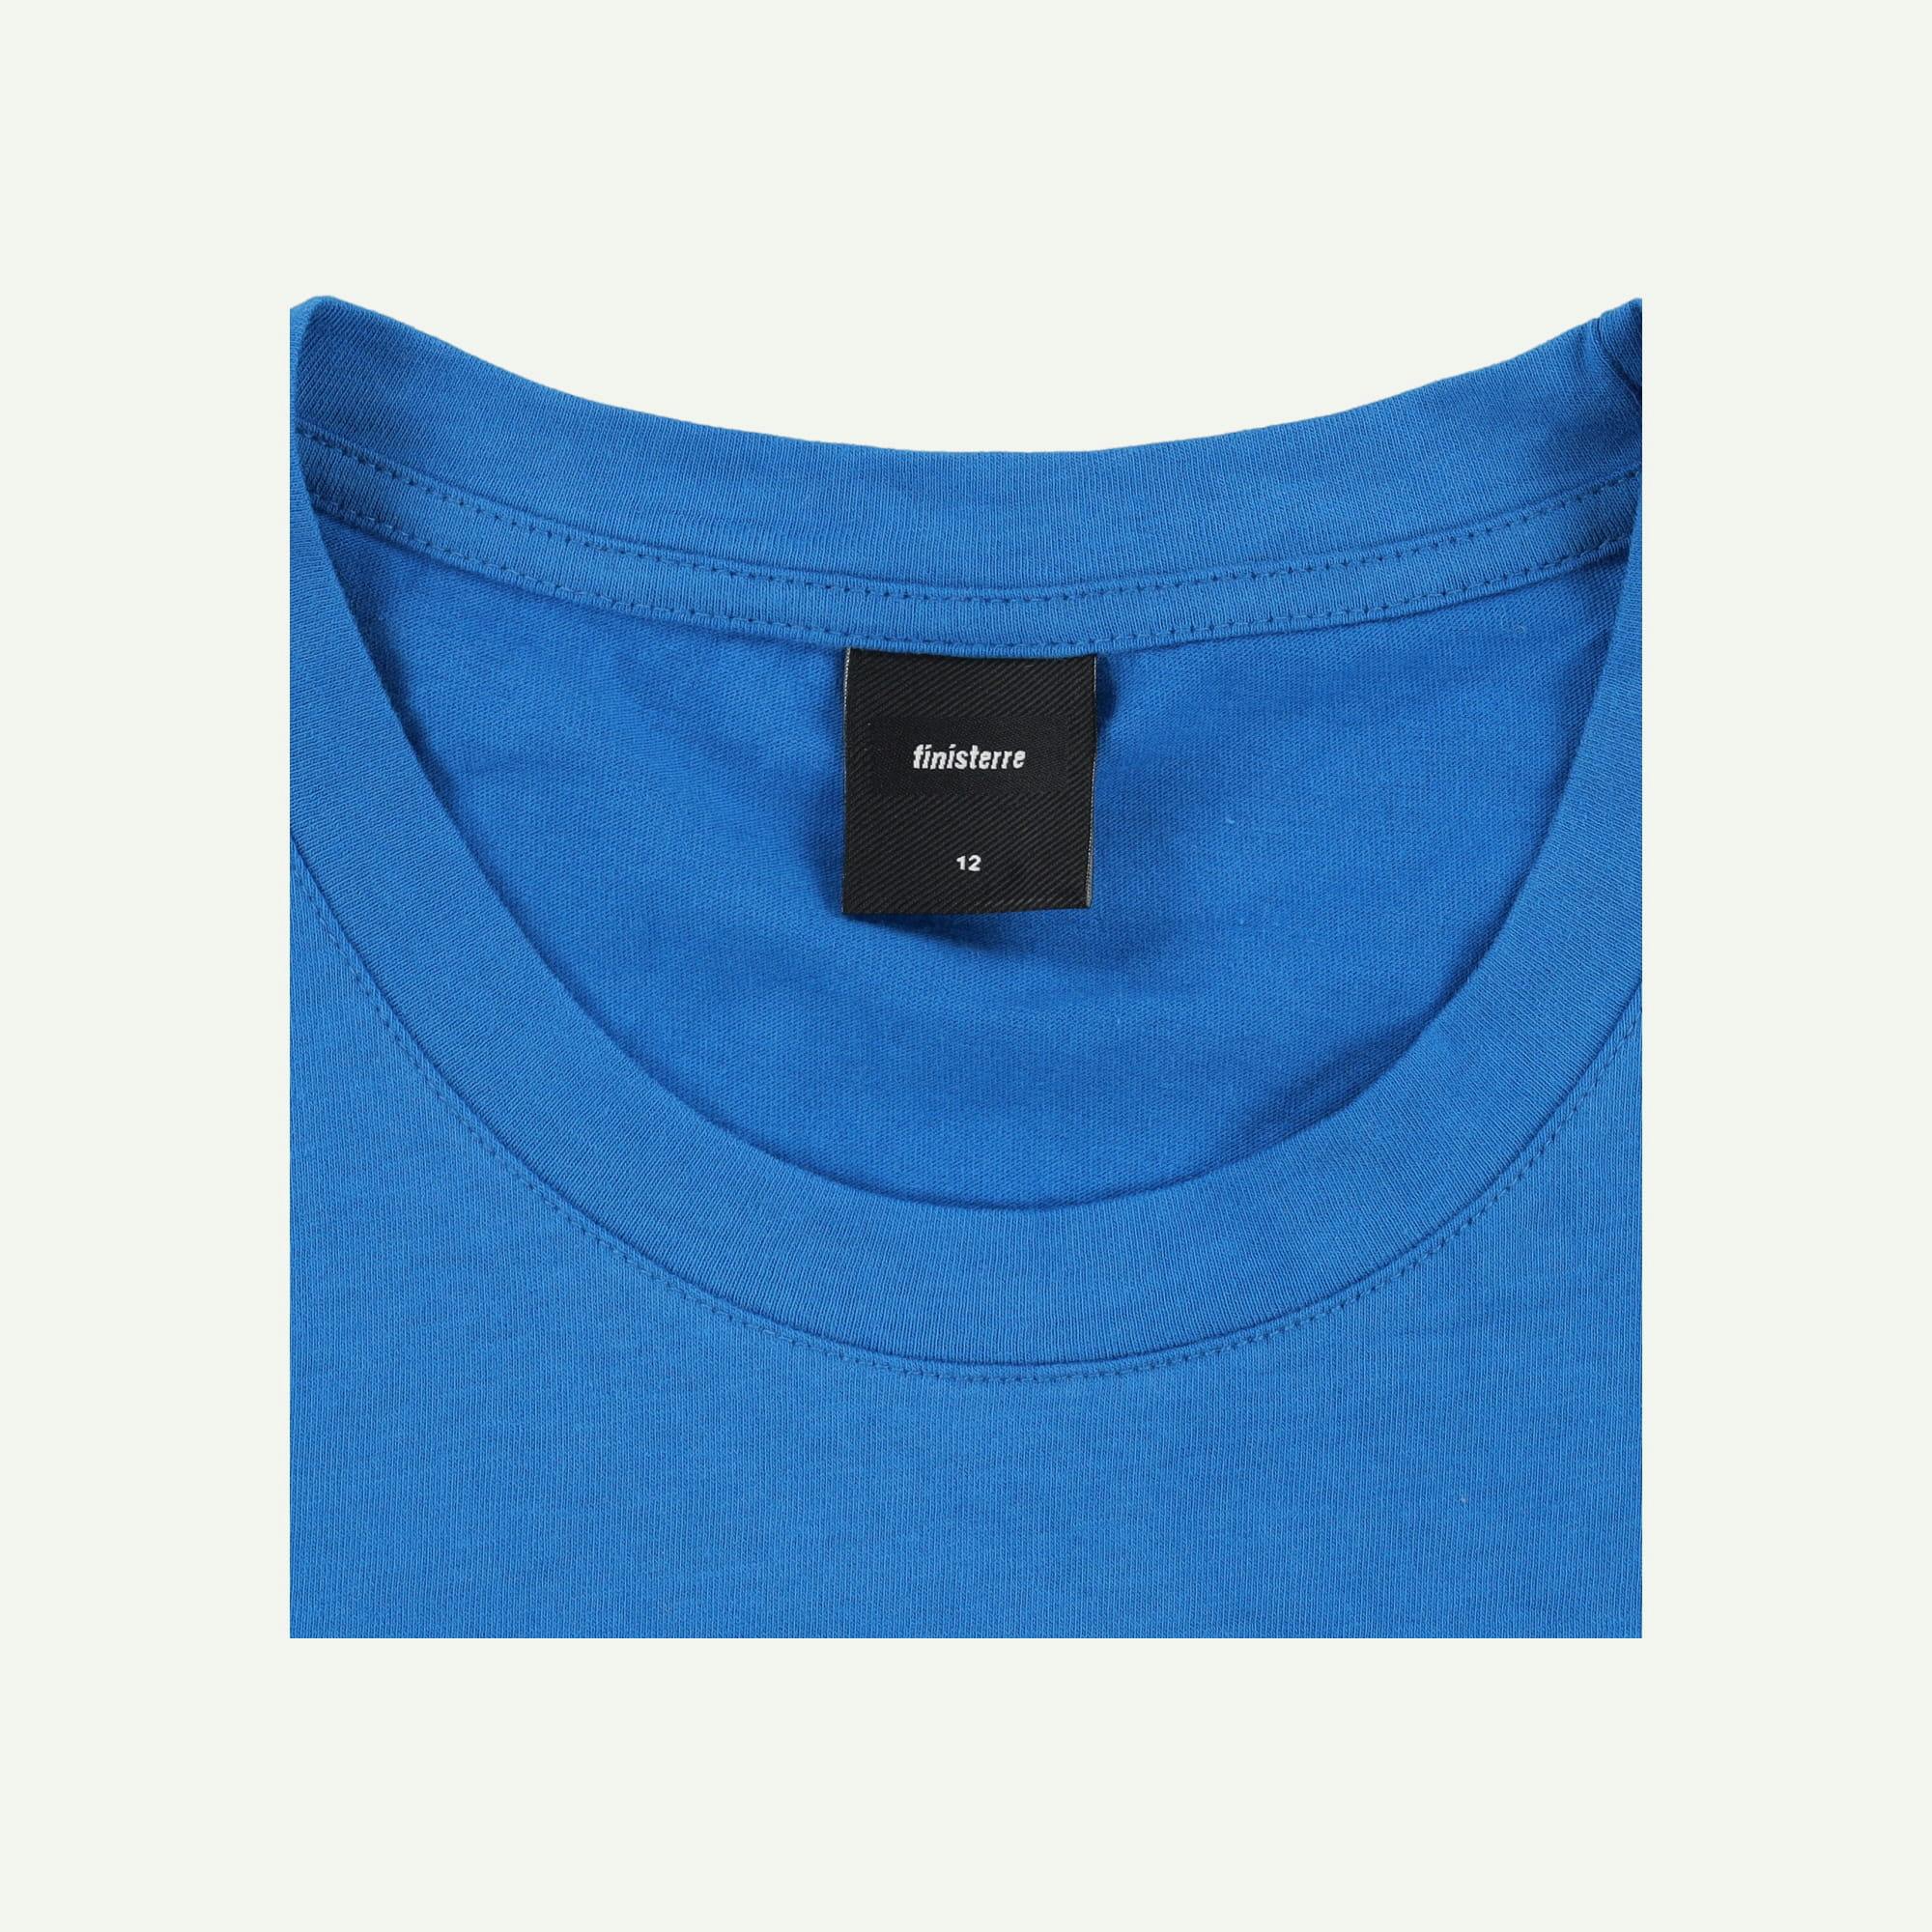 Finisterre Pre-loved Blue T-shirt